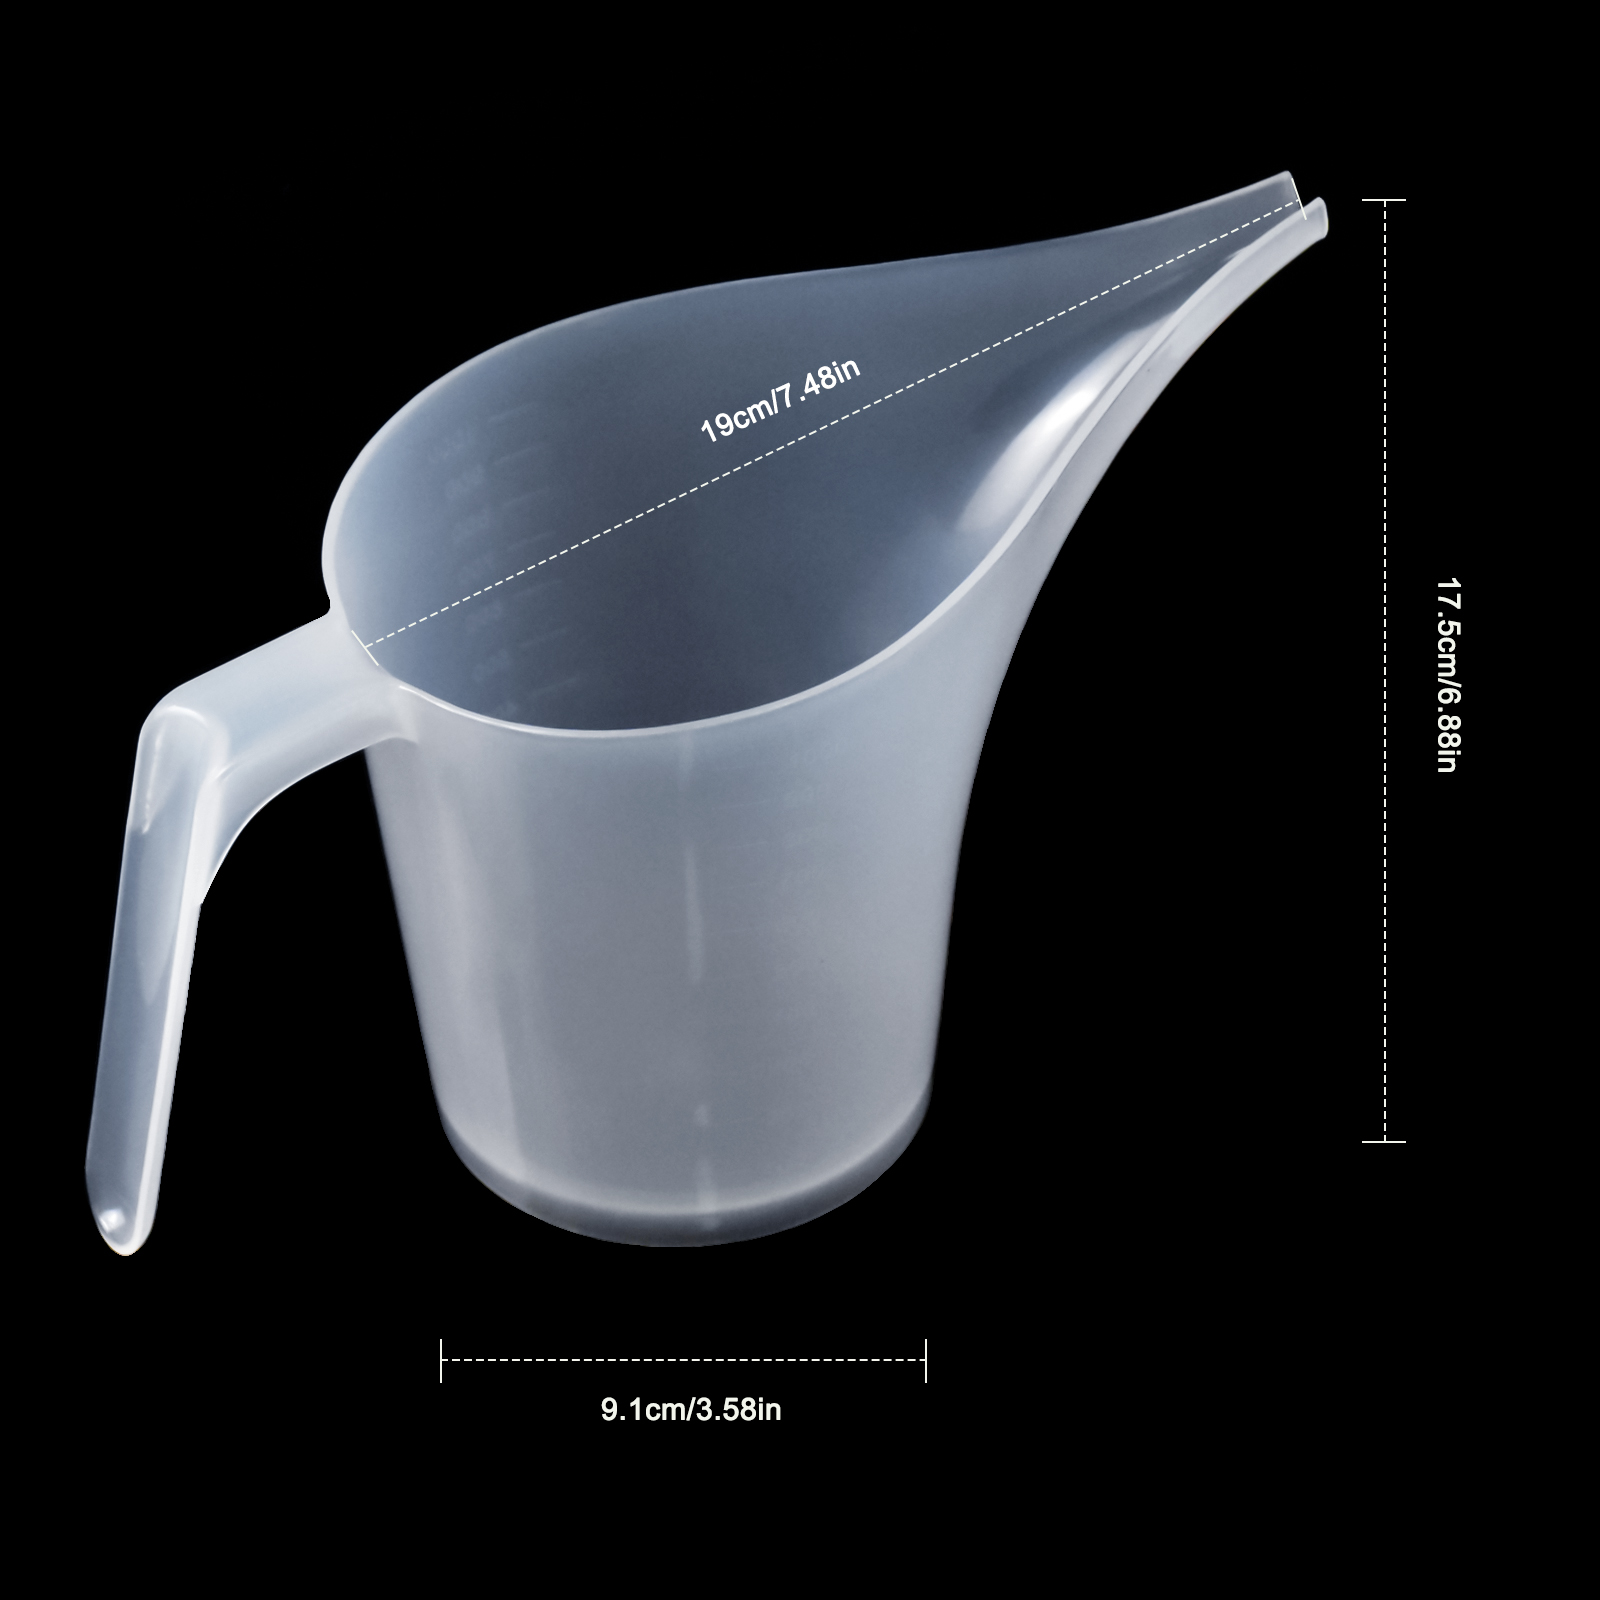 1L Big Plastic Measuring Cup With Handle - Buy 1L Big Plastic Measuring Cup  With Handle Product on